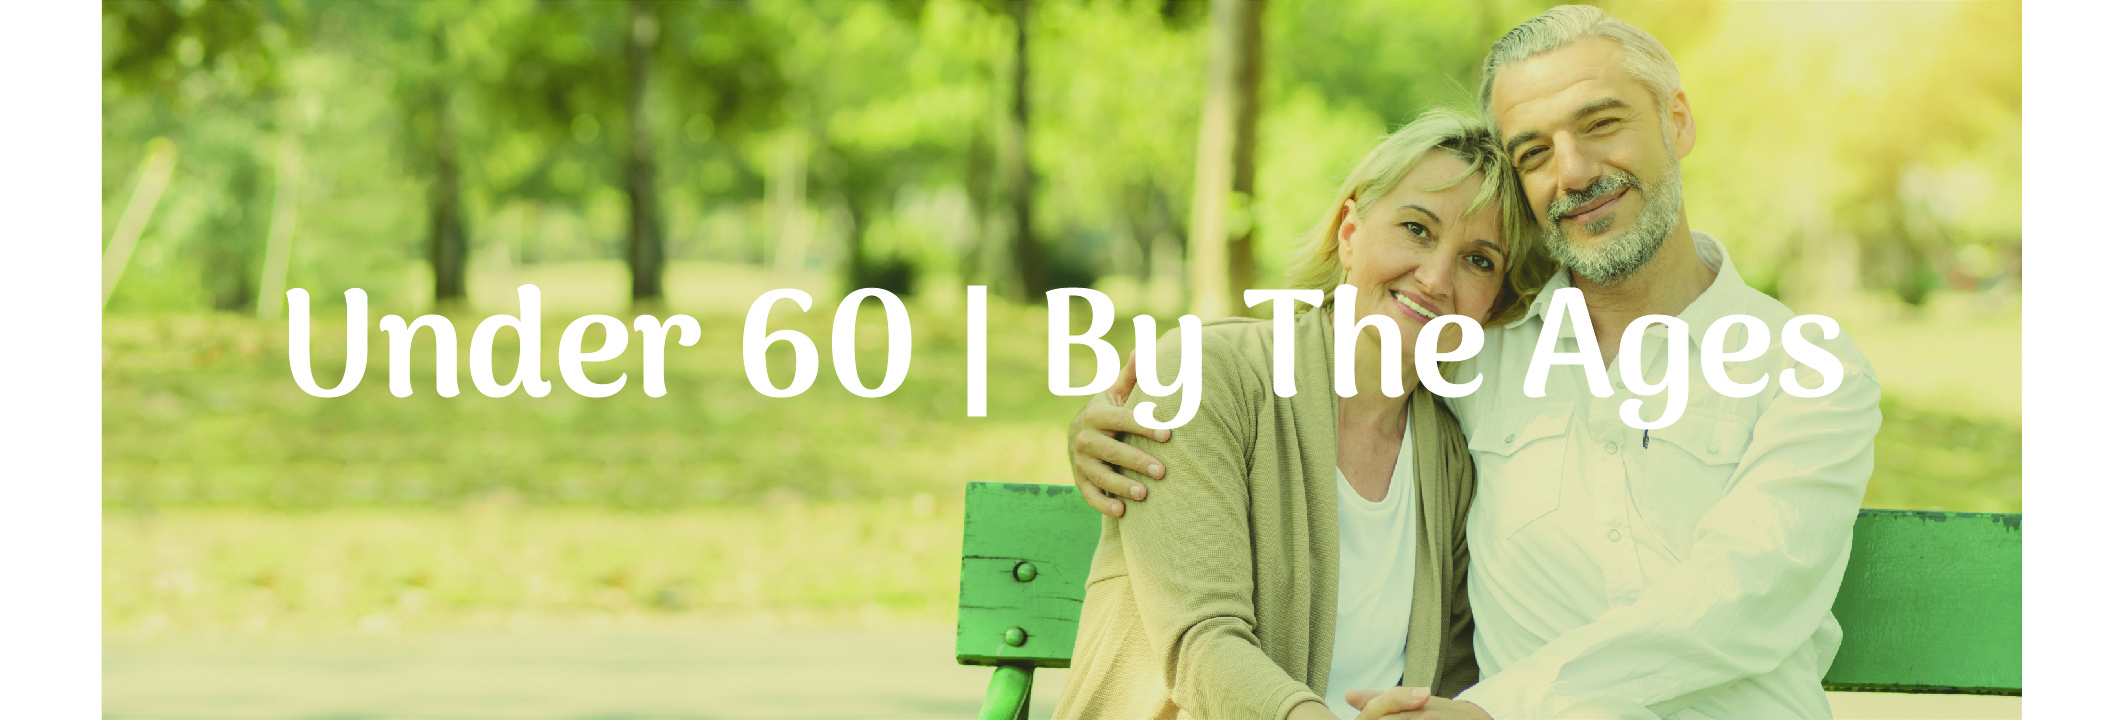 Under 60 | As Your Parents Age, Help Them Protect Their Finances